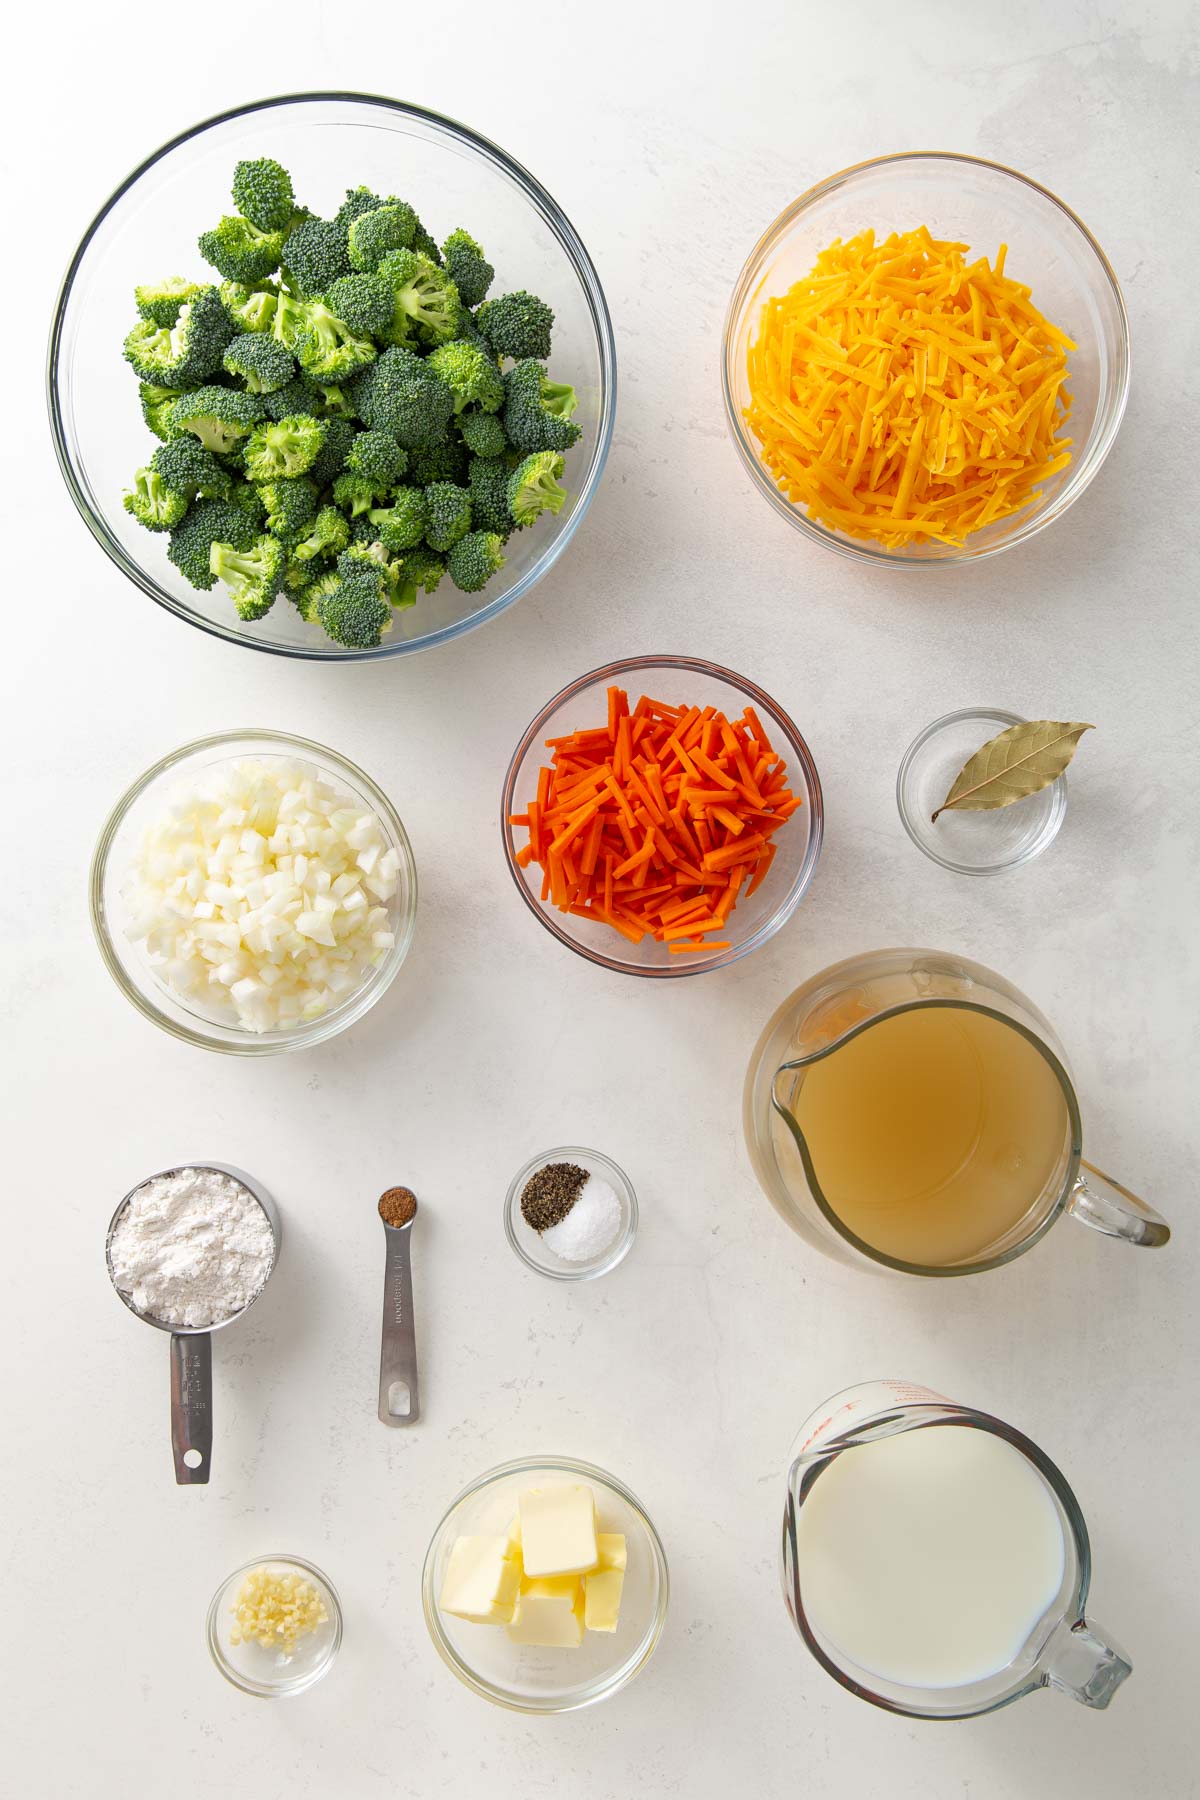 Overhead view of ingredients for low fat broccoli cheddar soup.